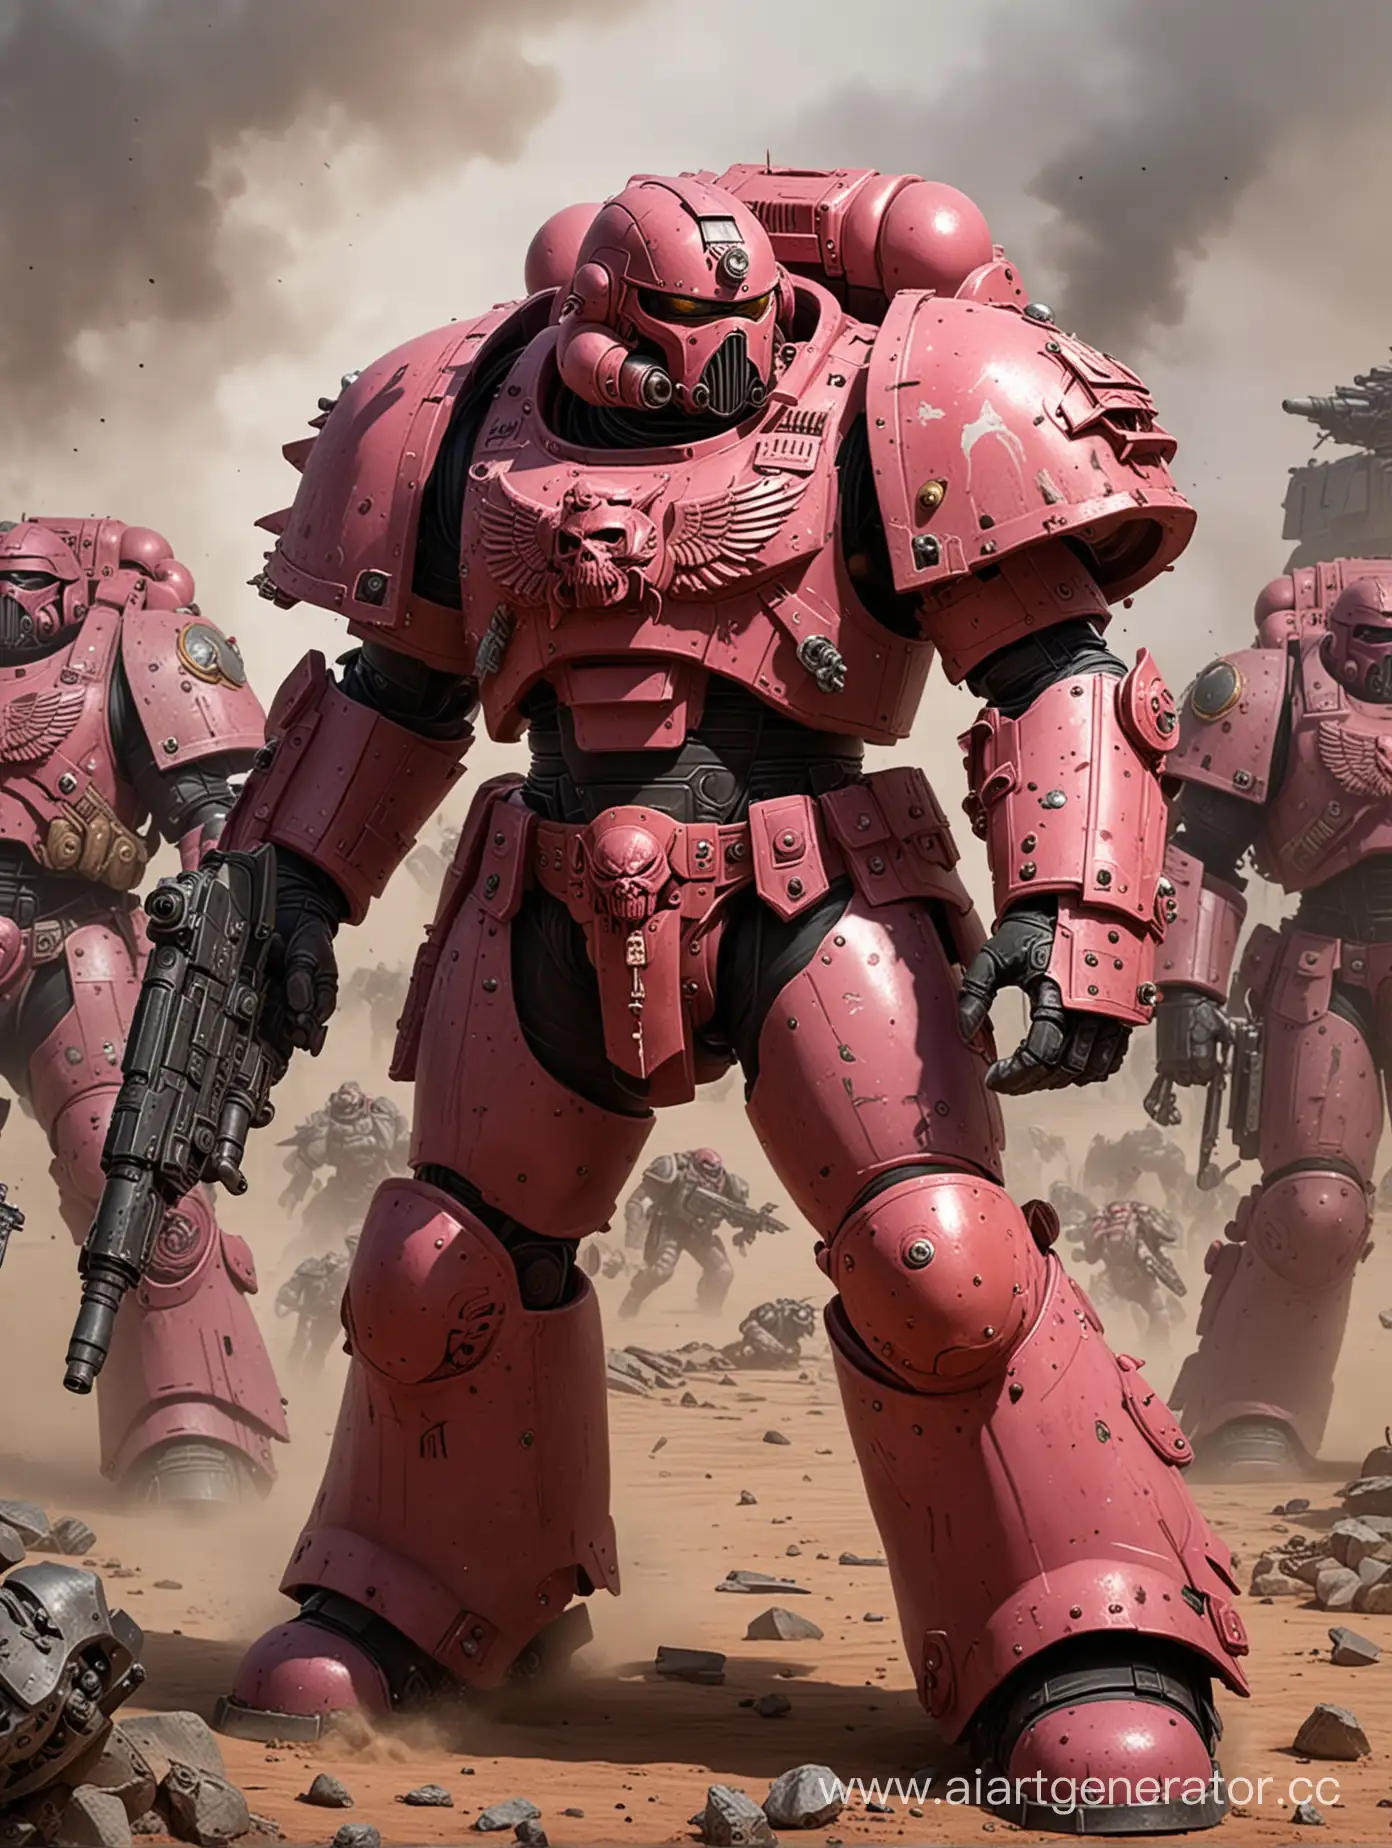 Draw the battle of the space marine unit of the Warhammer universe, the color of the armor combines red-pink and ambergris gray, against enemies